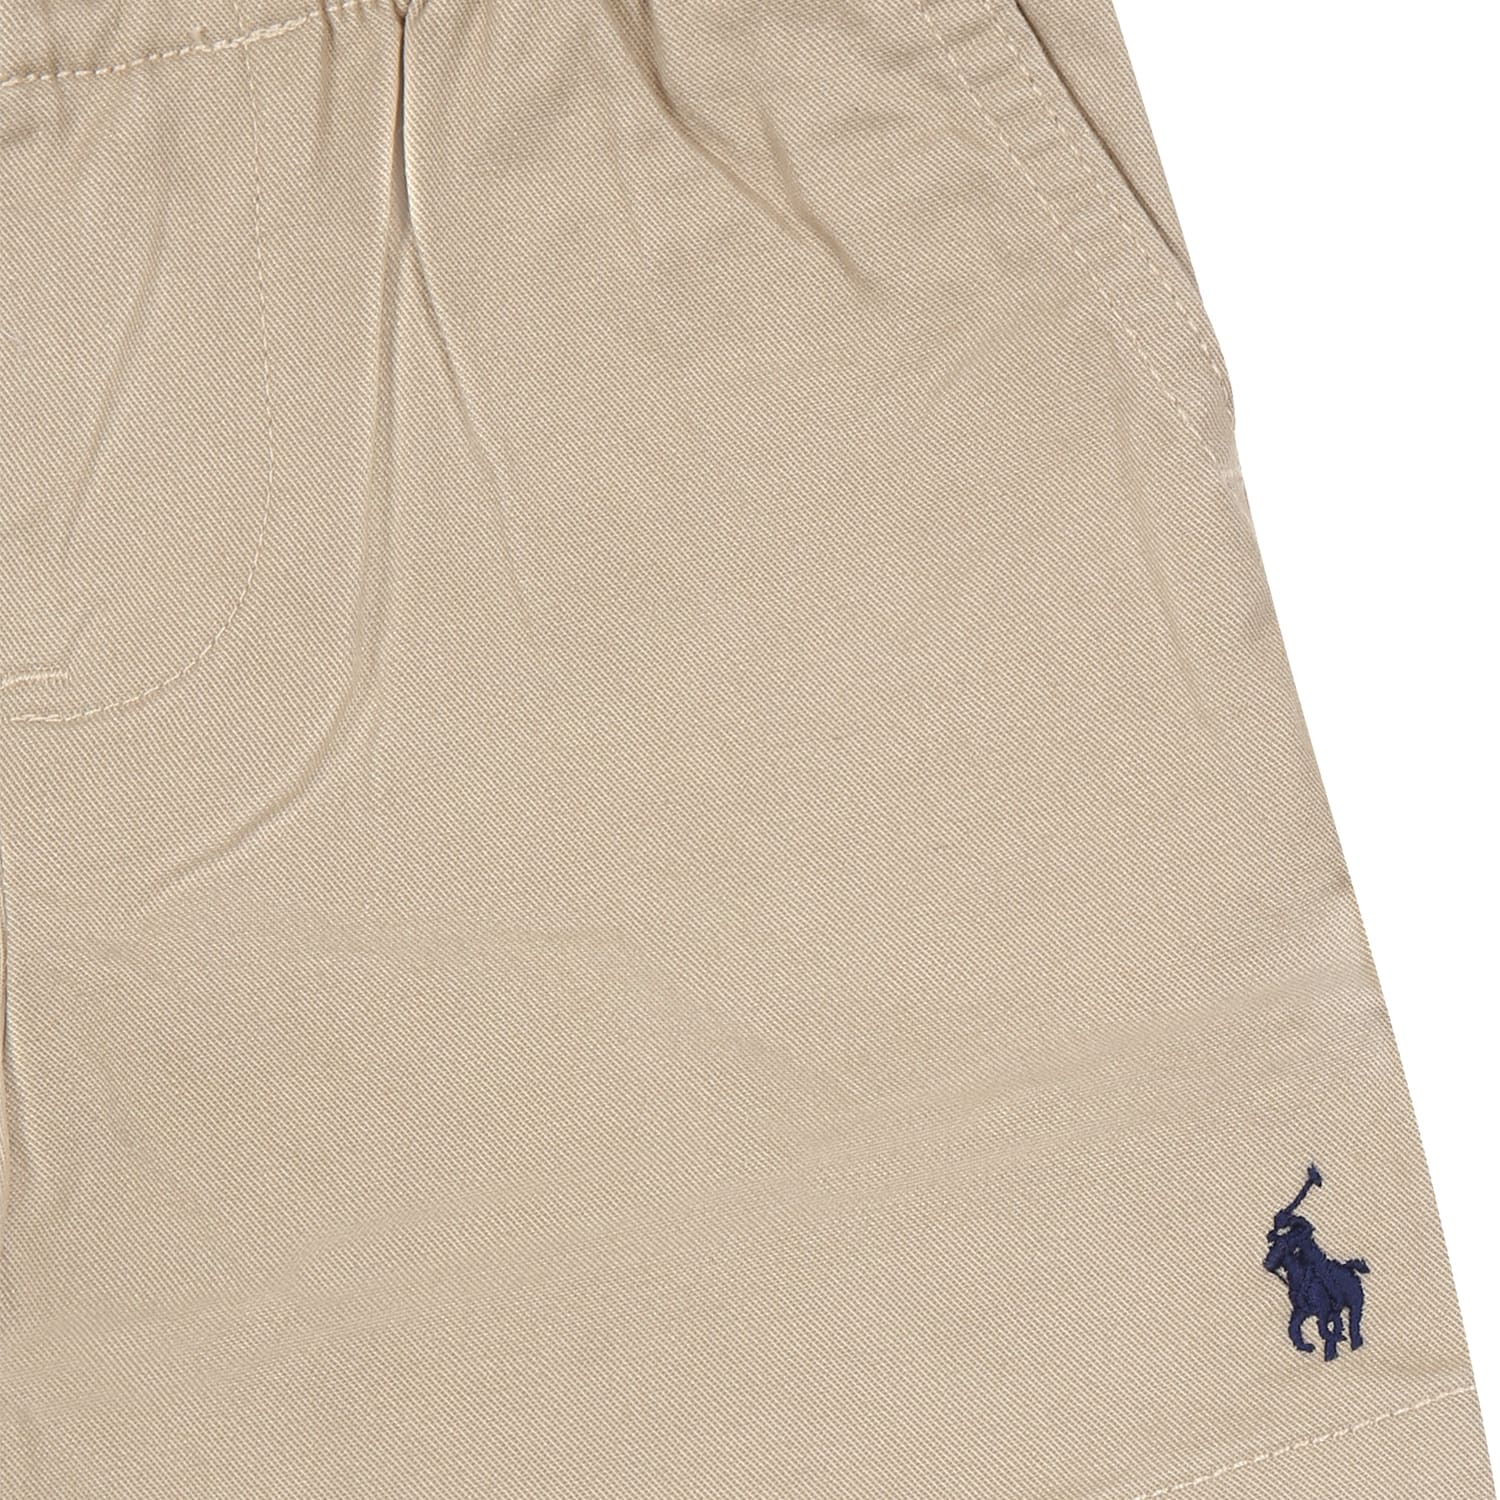 Shop Ralph Lauren Beige Shorts For Baby Boy With Embroidery